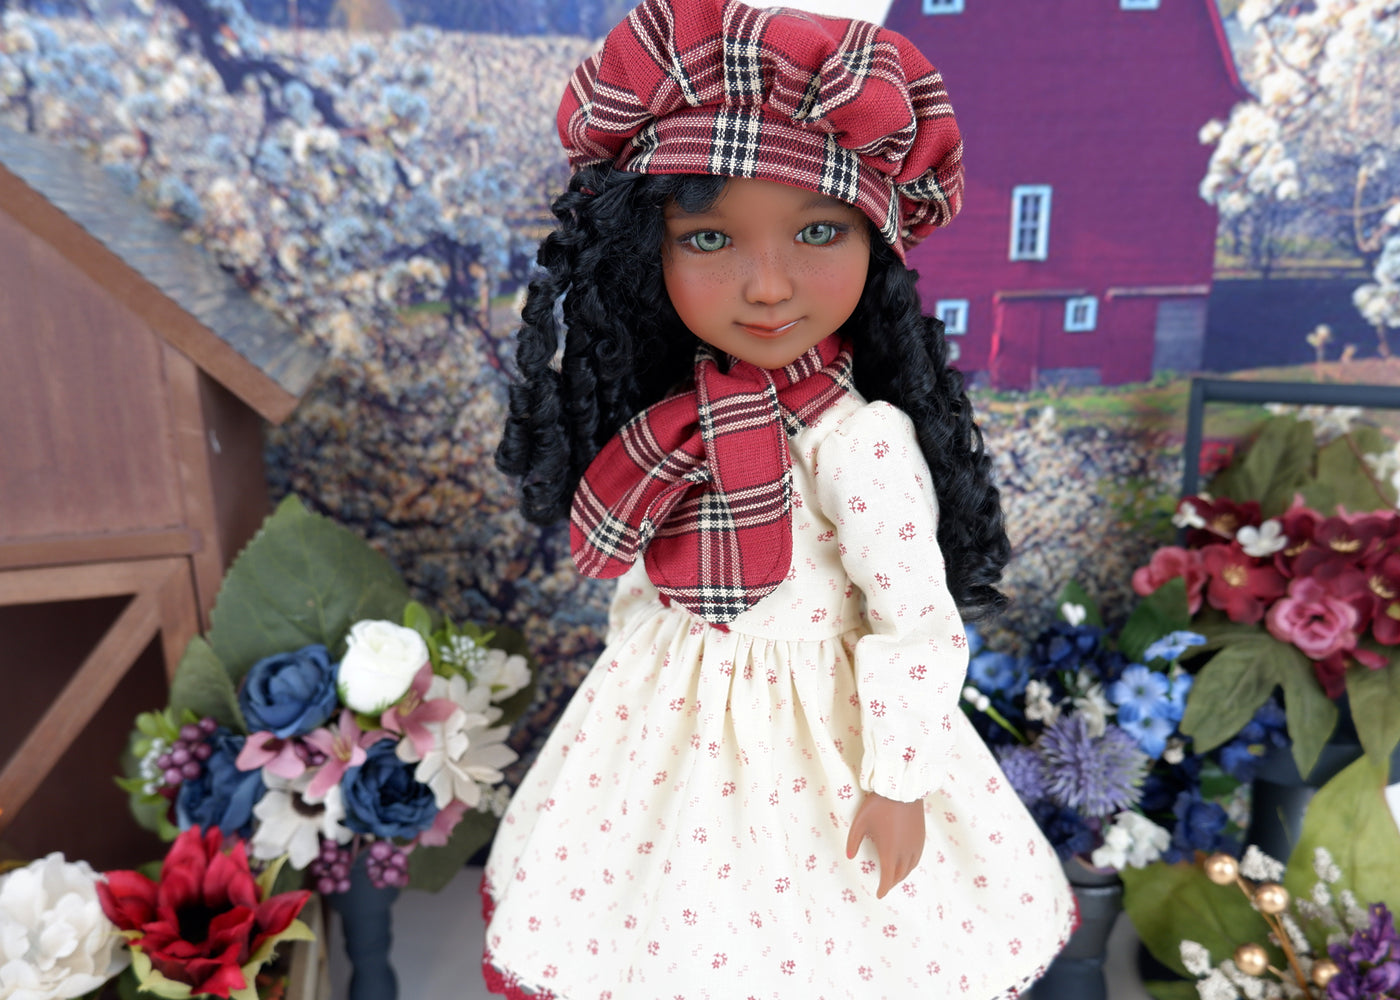 Blustery Fall - dress ensemble with boots for Ruby Red Fashion Friends doll